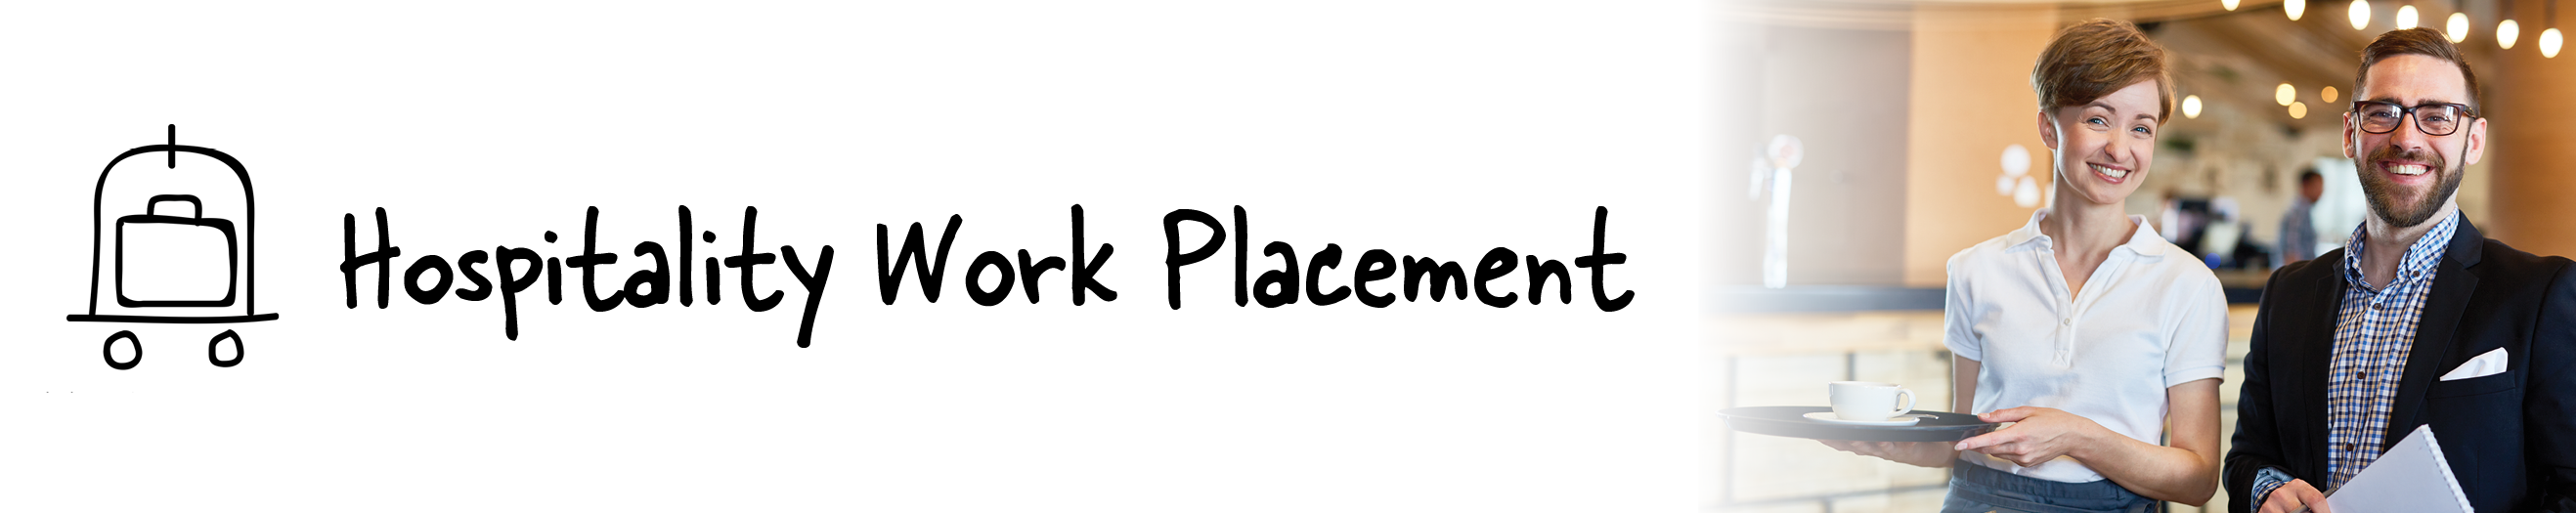 Hospitality Work Placement